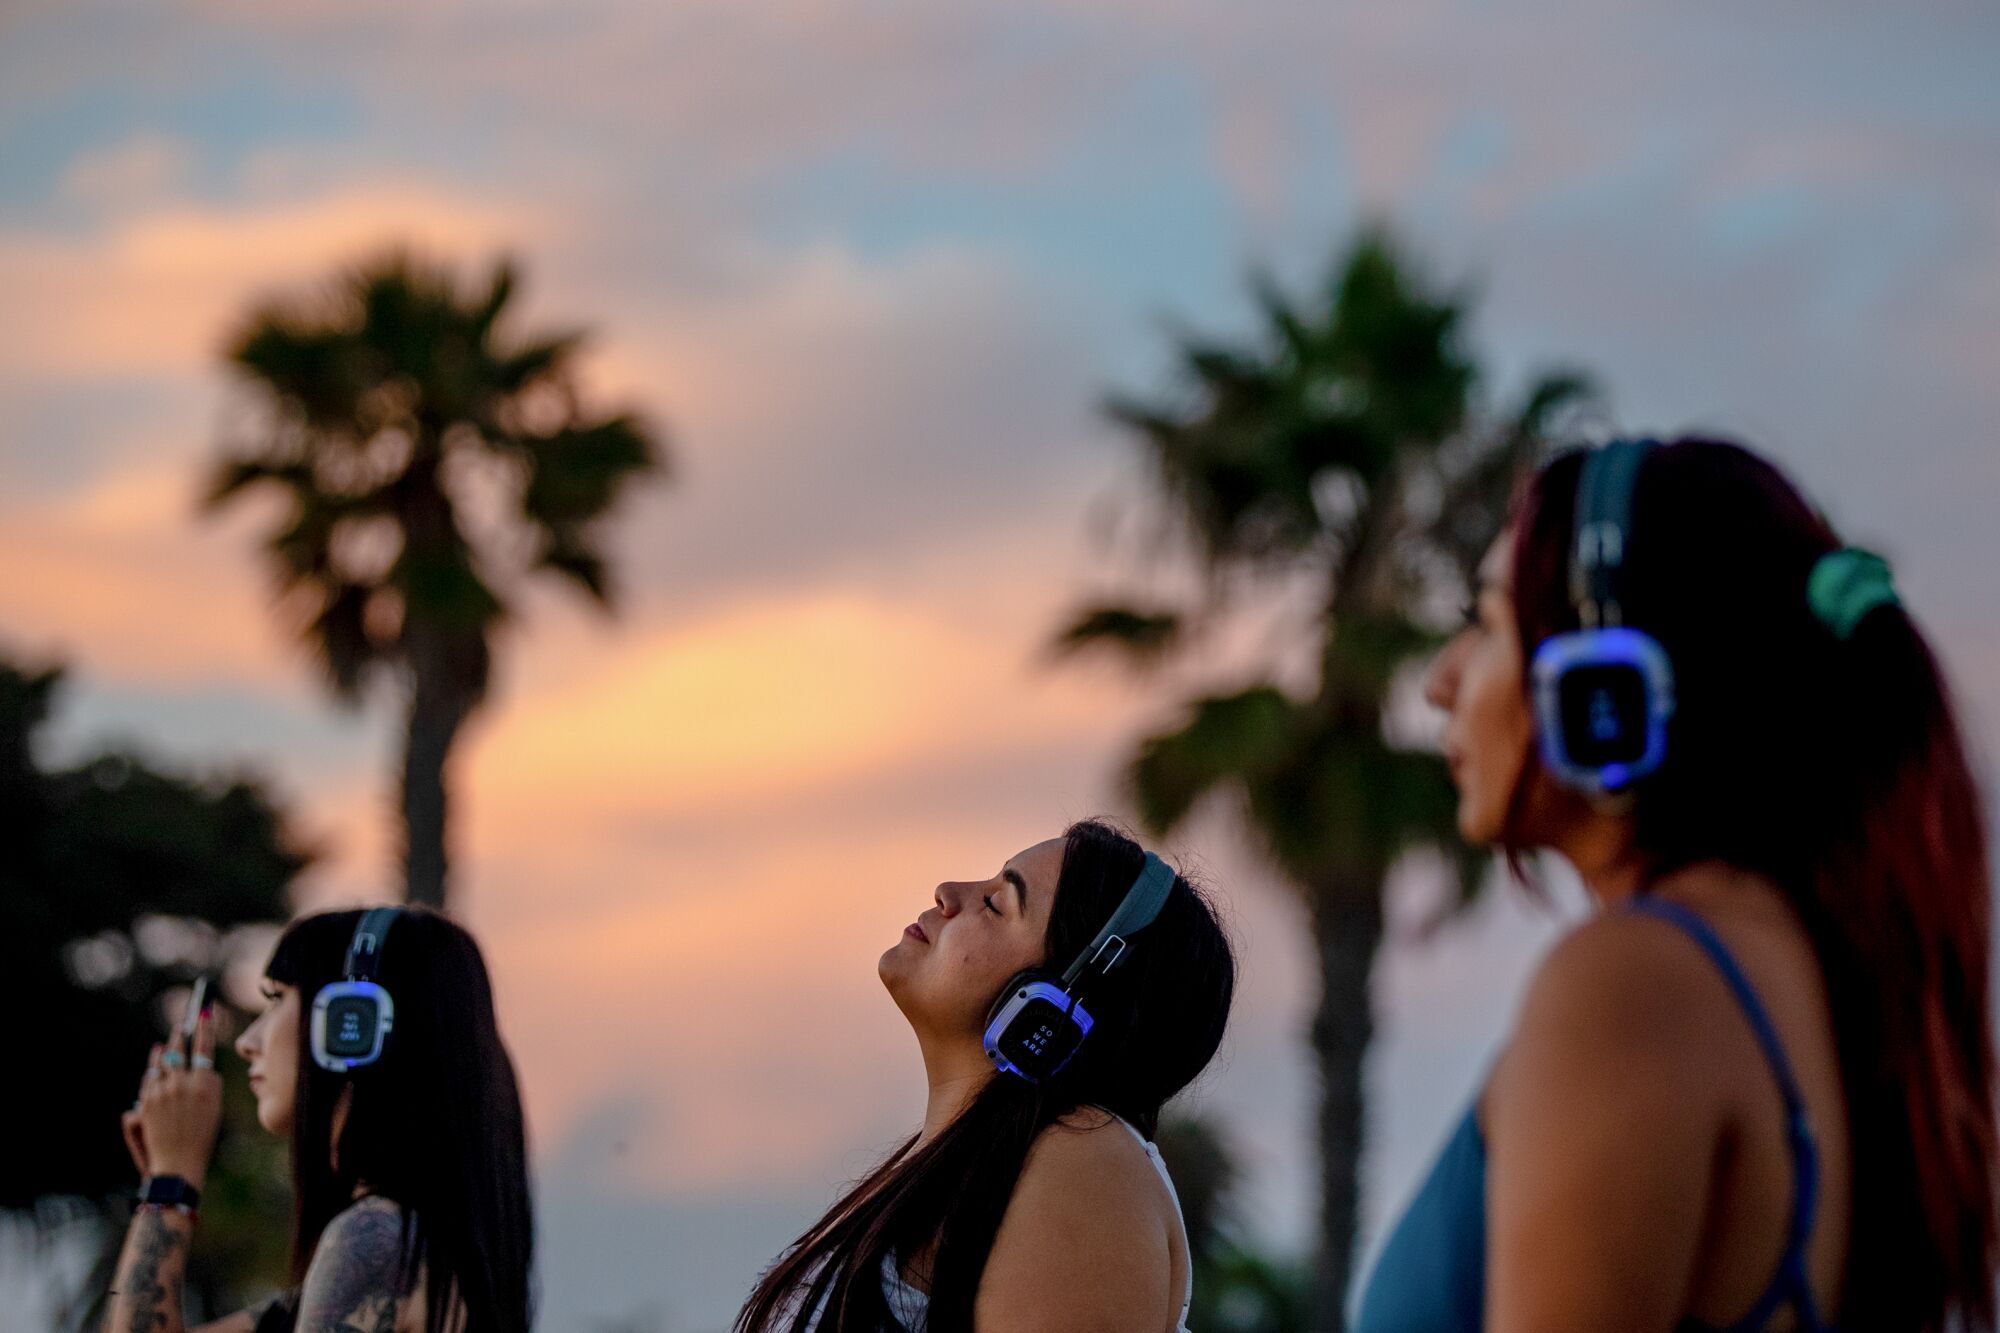 Side view of three people standing with headphones on, eyes closed, against a sunset and palm tree background.